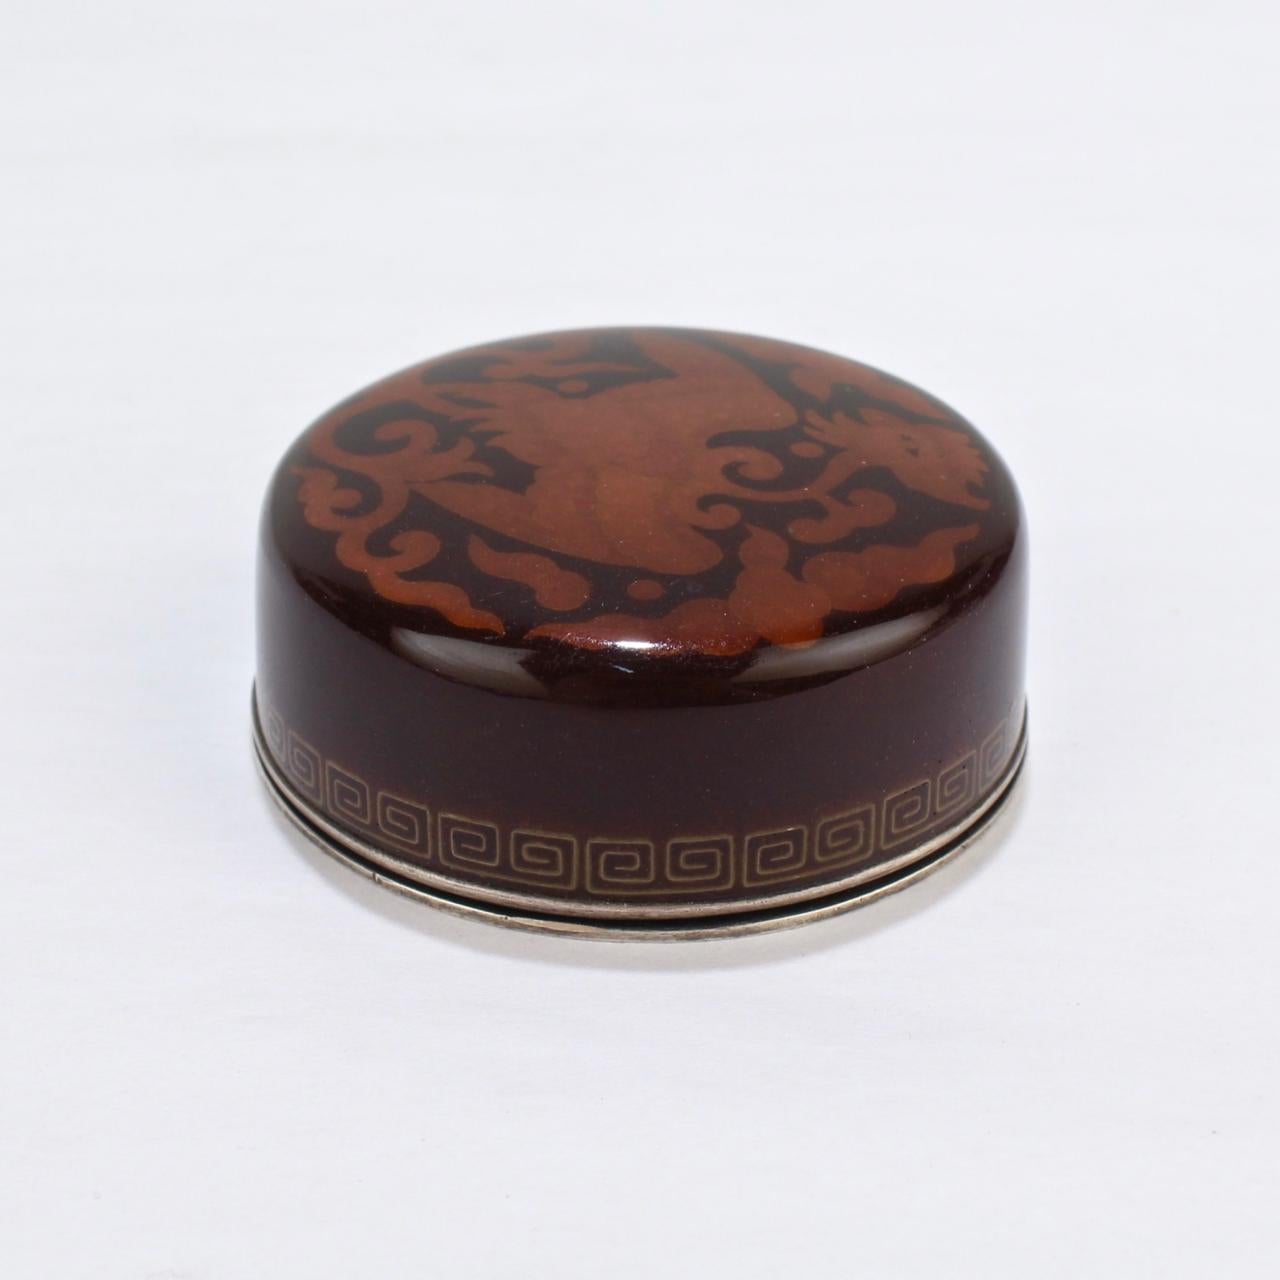 Signed Japanese Cloisonné Enamel Small Round Box with a Phoenix by Inaba 1